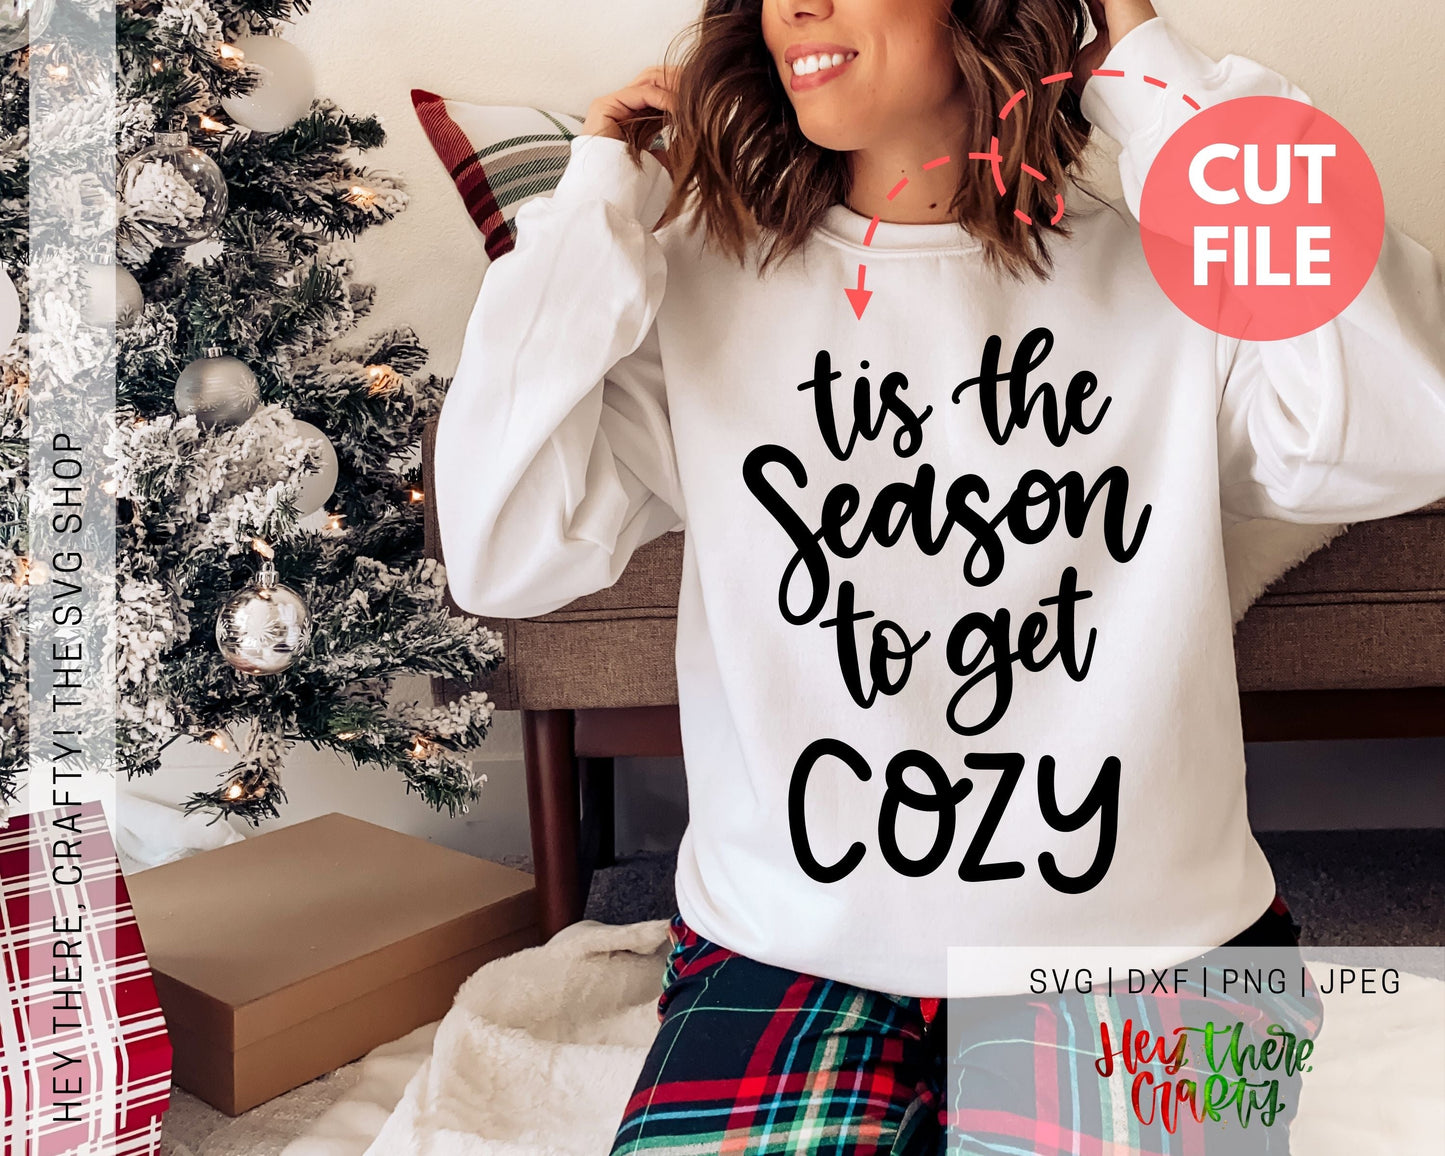 Tis the Season to get Cozy | SVG, PNG, DXF, JPEG